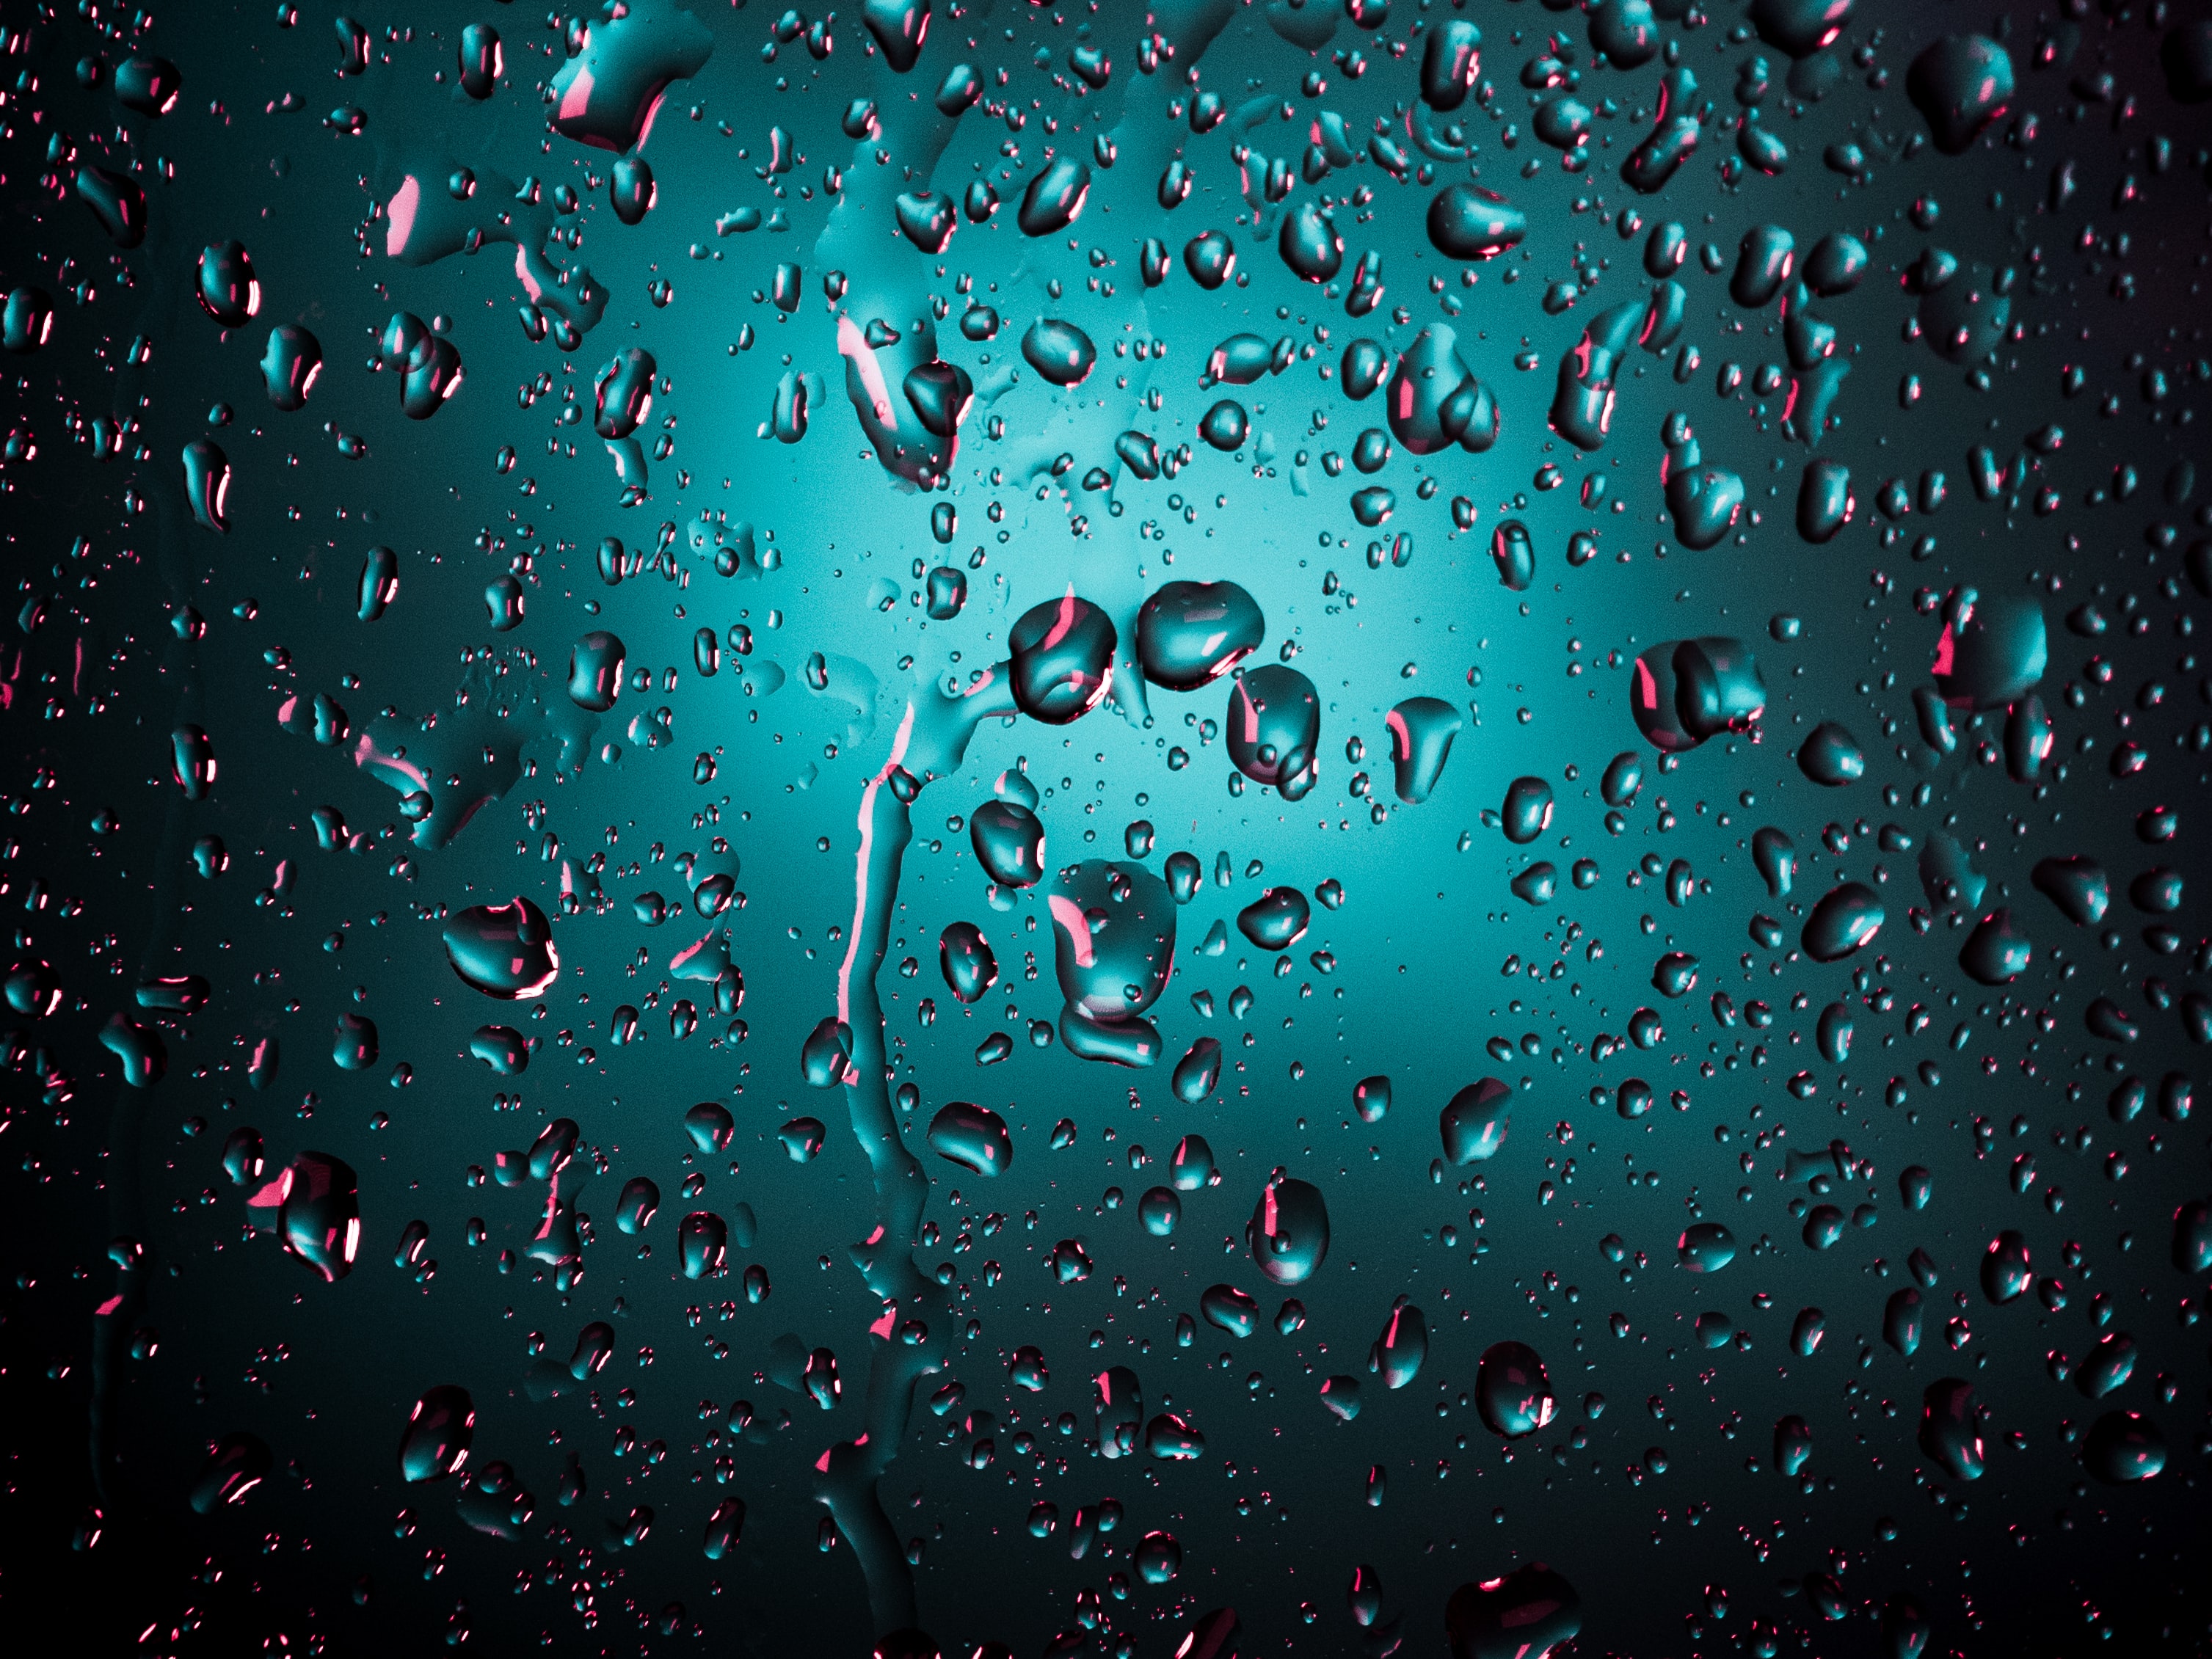 147878 free wallpaper 360x640 for phone, download images surface, macro, water, drops 360x640 for mobile